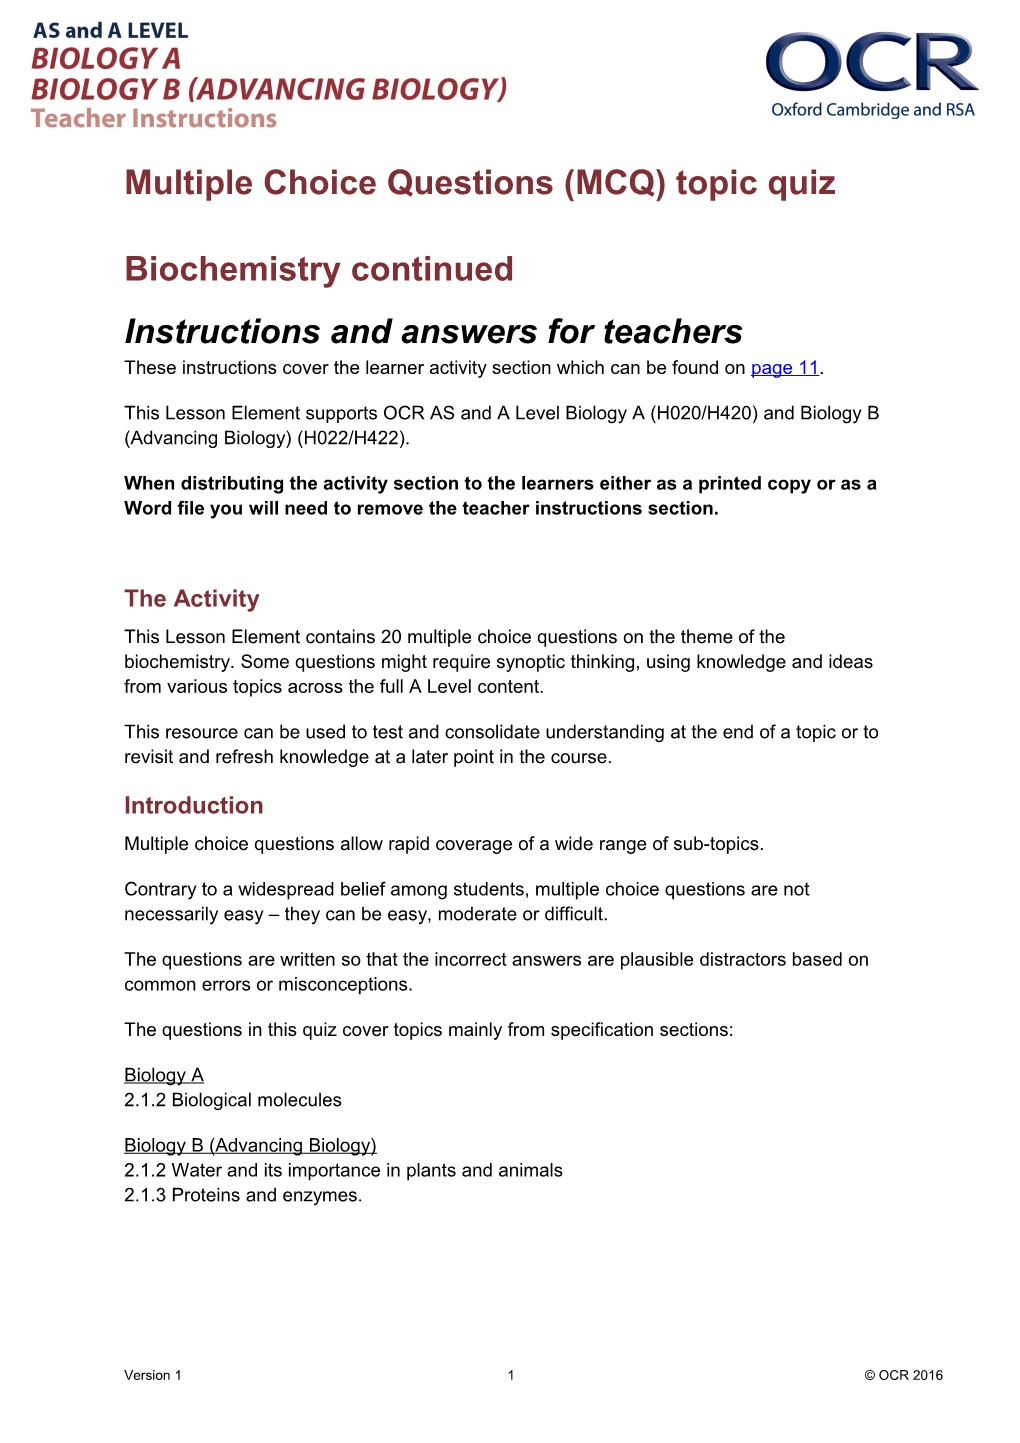 AS and a Level Biology Lesson Element - Biochemistry